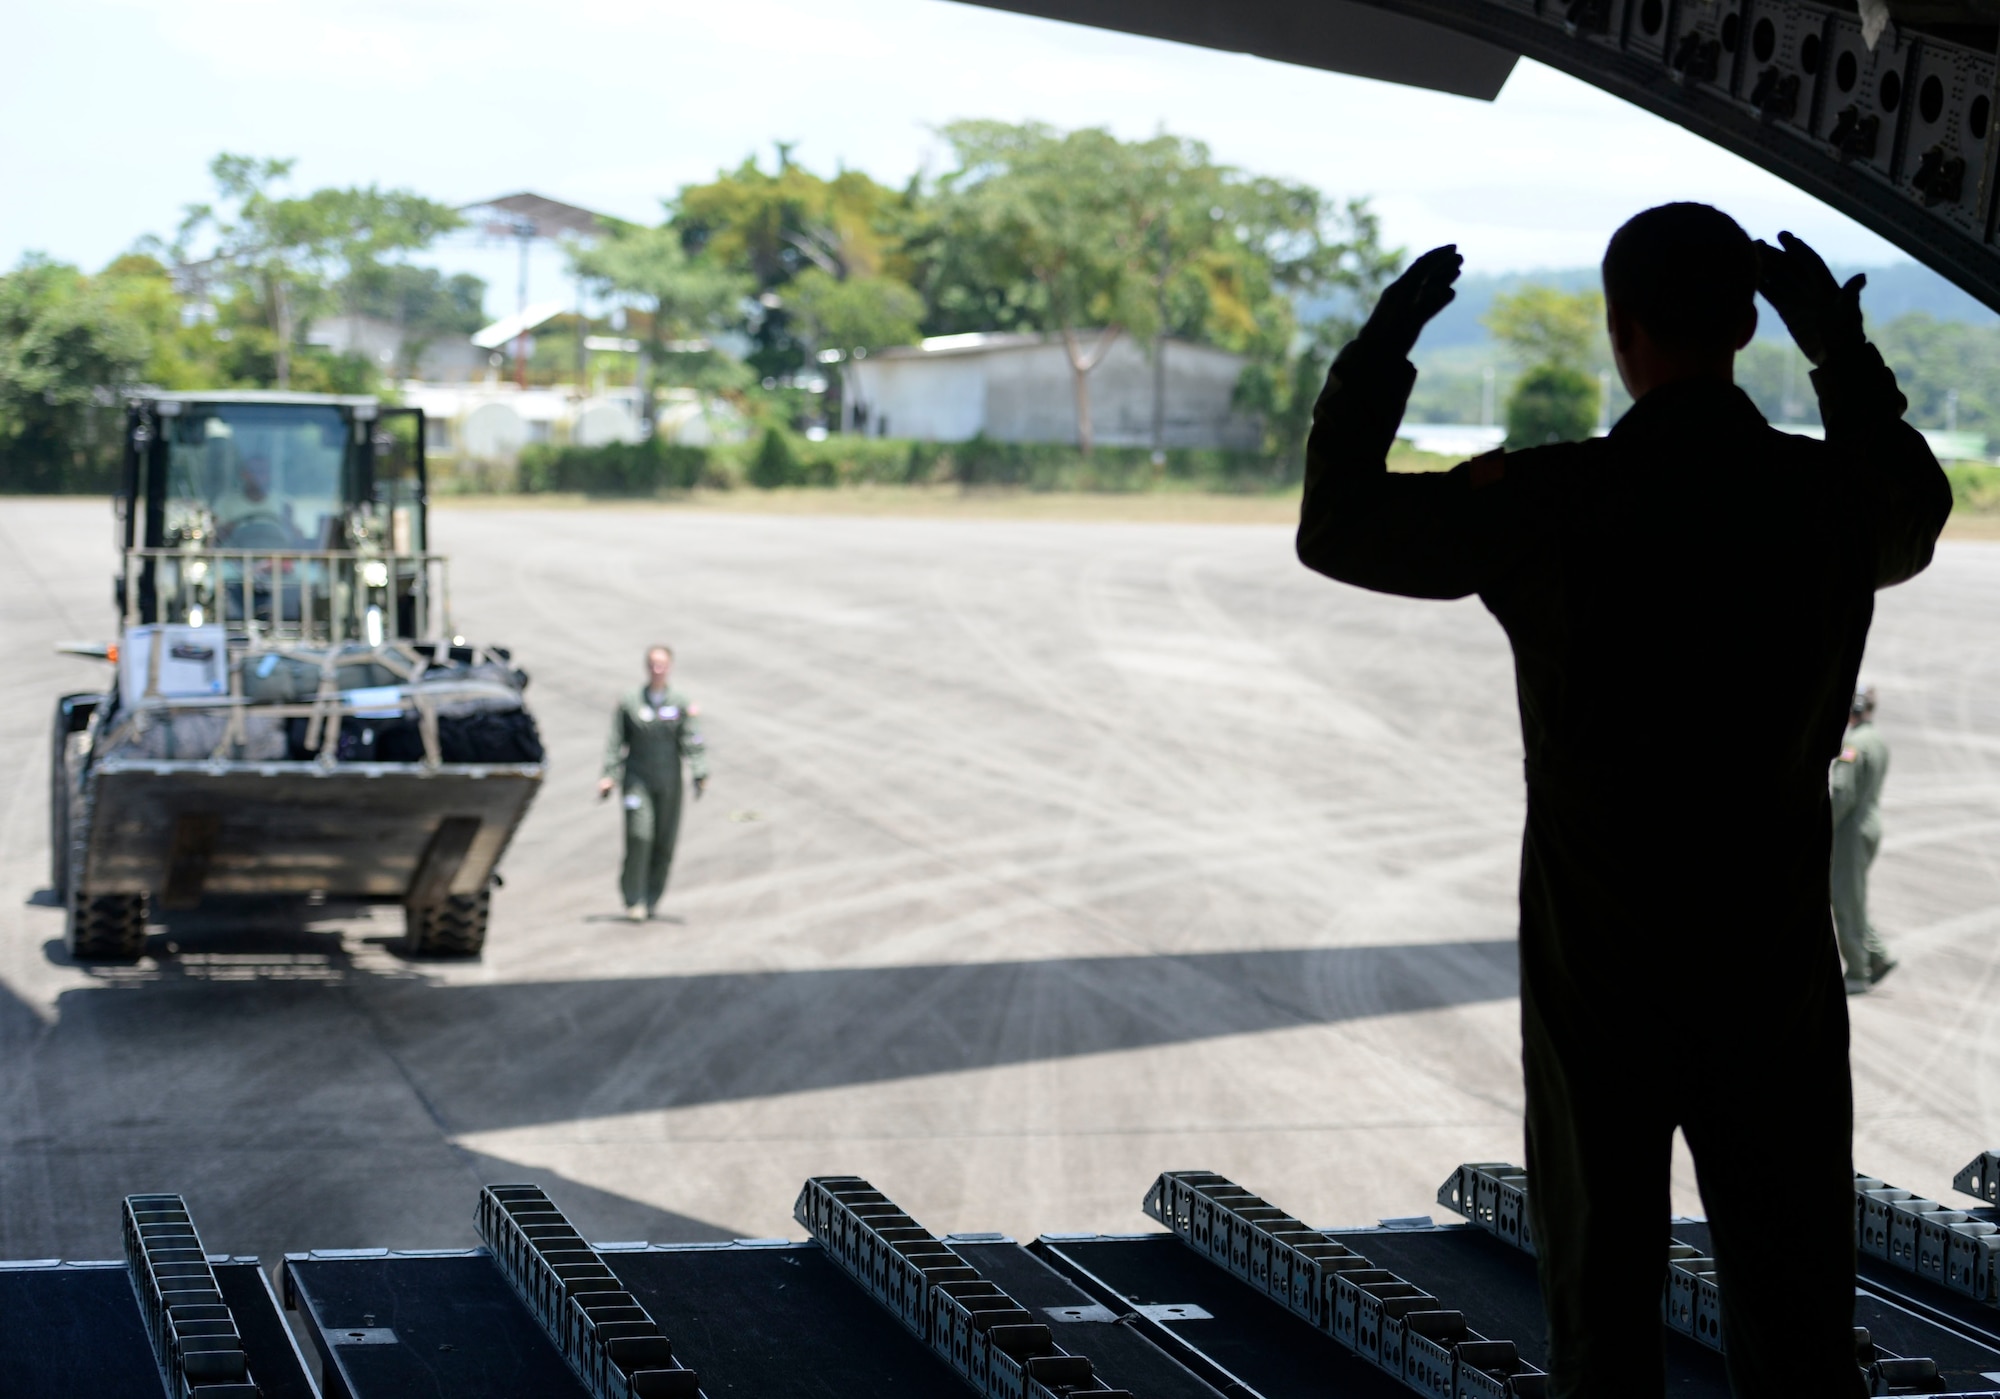 A loadmaster with the 62nd Airlift Wing out of Joint Base Lewis-McChord, Wash., guides U.S. Air Force Staff Sgt. Raul Perez, 823rd Expeditionary RED HORSE Squadron vehicle maintenance NCOIC, out of Hurlburt Field, Fla., as he moves a pallet with a forklift onto a waiting C-17 Globemaster III from the 62nd AW at Base Aerea Coronel Hector Caraccioli Moncada in La Ceiba, Honduras, Aug. 28, 2015. Vehicles, equipment and personnel from the New Horizons Honduras 2015 training exercise redeployed to Hurlburt Field and all remaining equipment will be moved via sealift. New Horizons was launched in the 1980s and is an annual joint humanitarian assistance exercise that U.S. Southern Command conducts with a partner nation in Central America, South America or the Caribbean. The exercise improves joint training readiness of U.S. and partner nation civil engineers, medical professionals and support personnel through humanitarian assistance activities. (U.S. Air Force photo by Capt. David J. Murphy/Released)